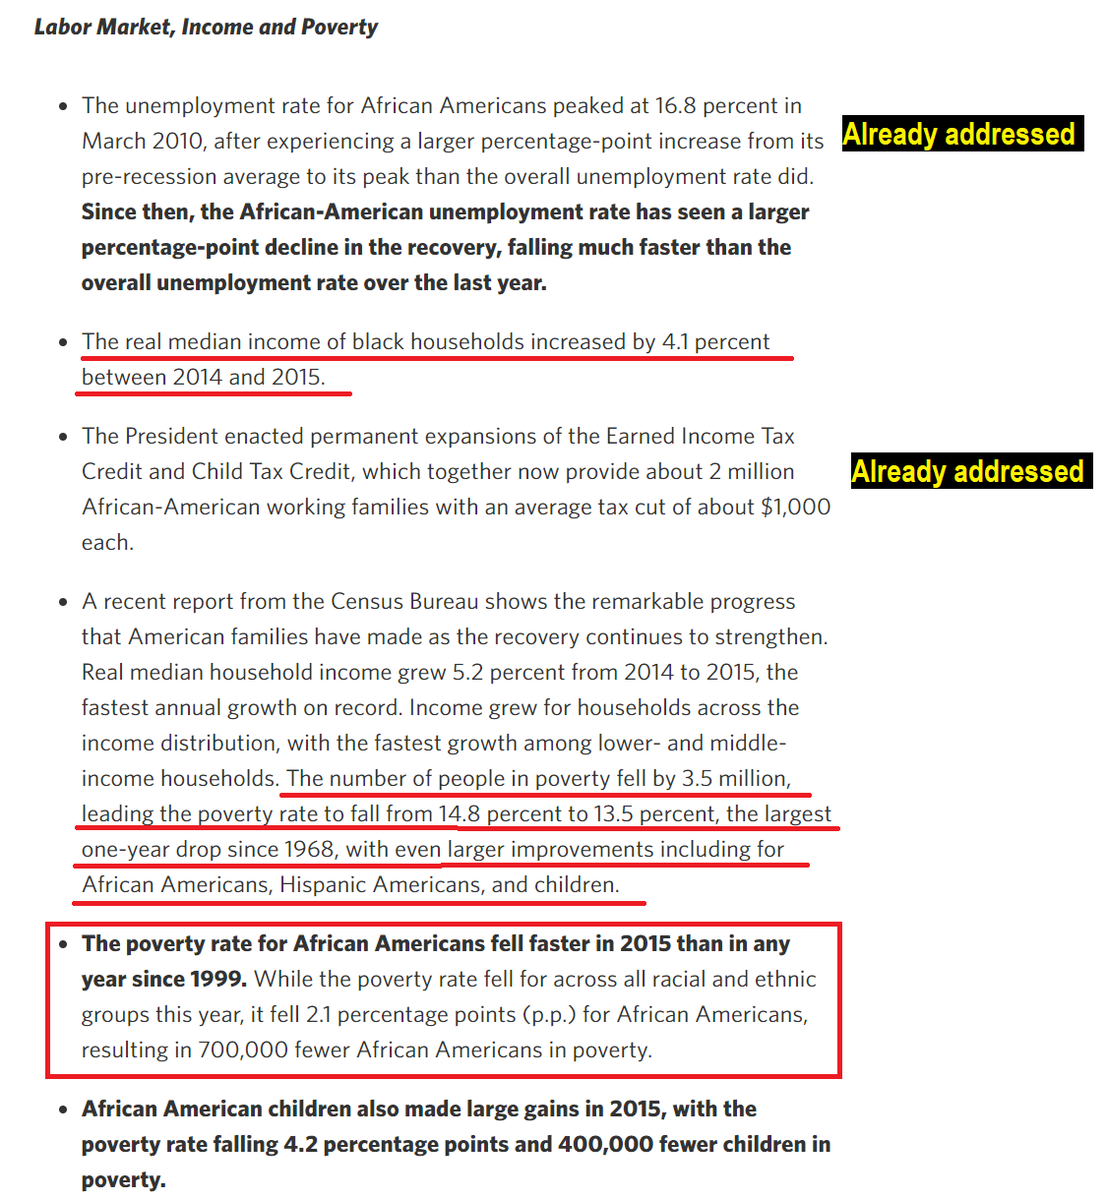 Now onto the 10/14/16 release. Again, "hard work" mentioned in the opening paragraph. . And yes, the poverty rate did fall in '15 &  #ADOS did experience growth. But click on the third picture for proper context. 20/n